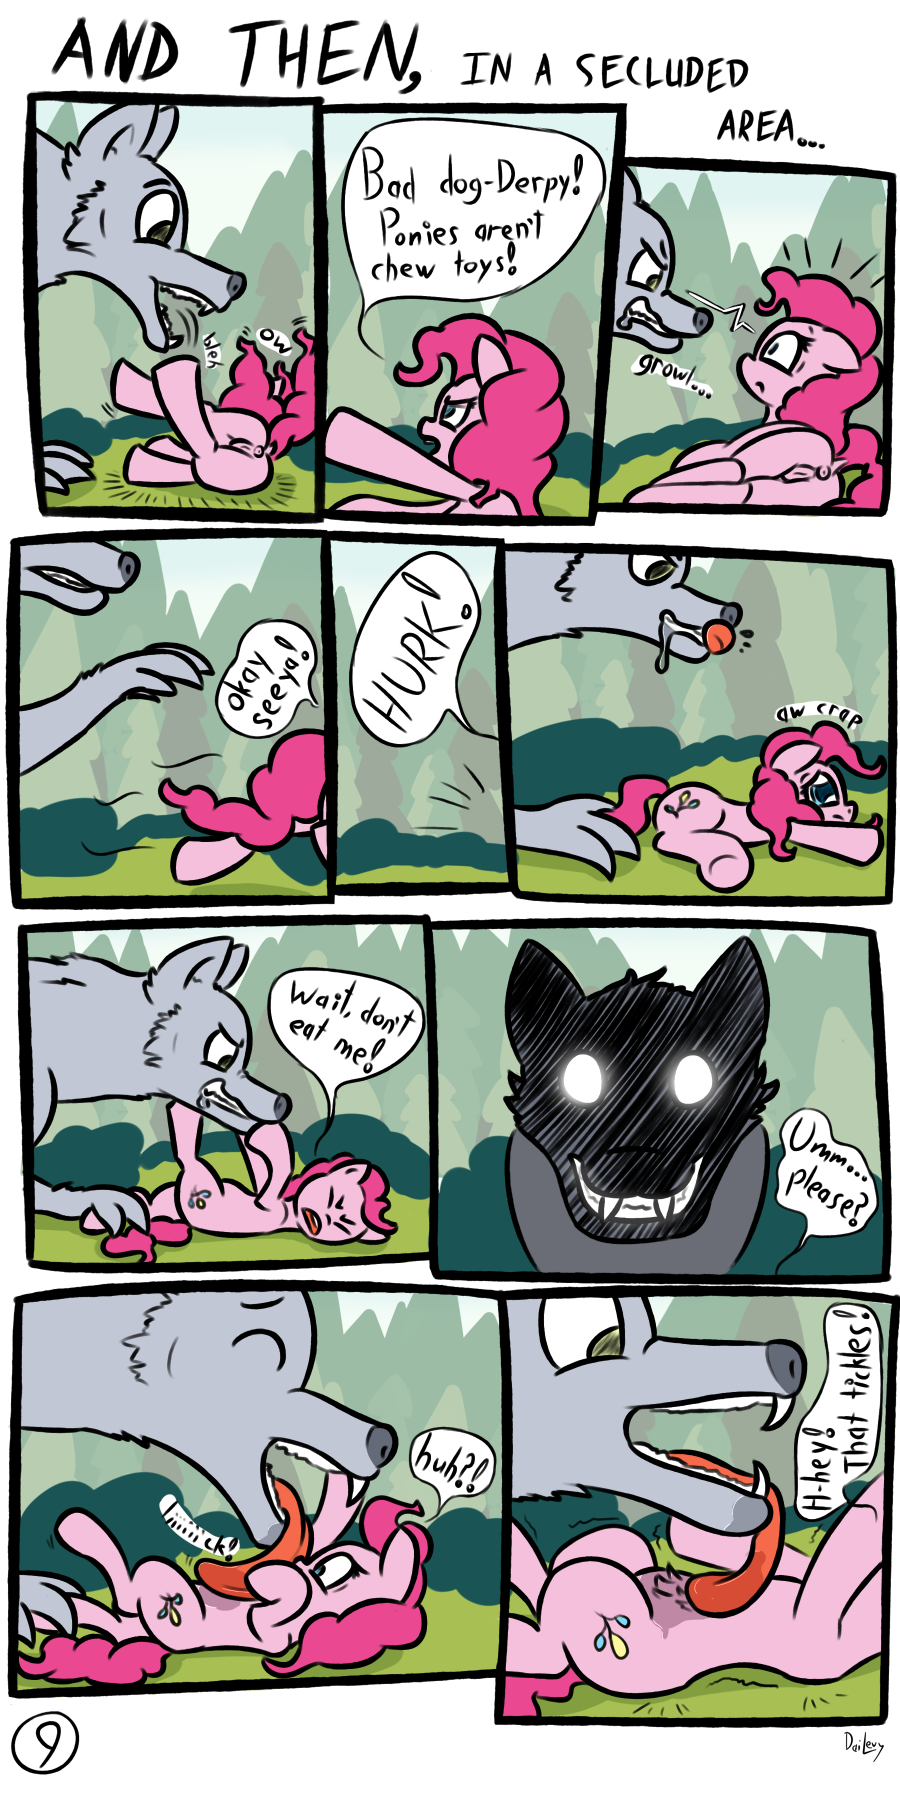 Twilight's Book of Transmogrification Chapter 1: Day of the Dog porn comic picture 10